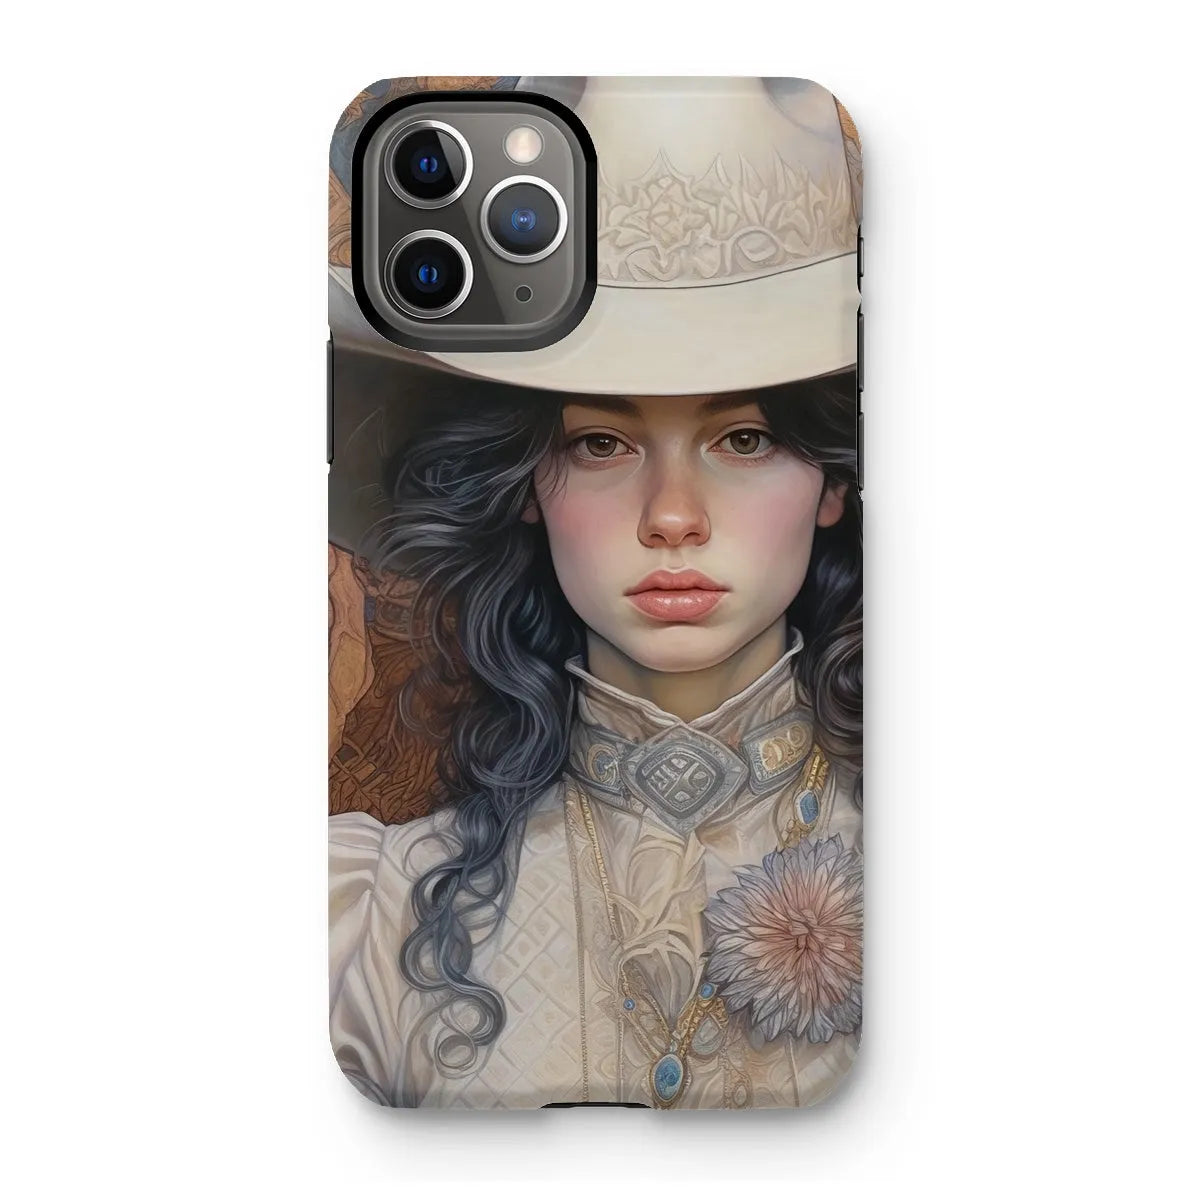 Helena The Lesbian Cowgirl - Sapphic Art Phone Case - Iphone 11 Pro / Matte - Mobile Phone Cases - Aesthetic Art